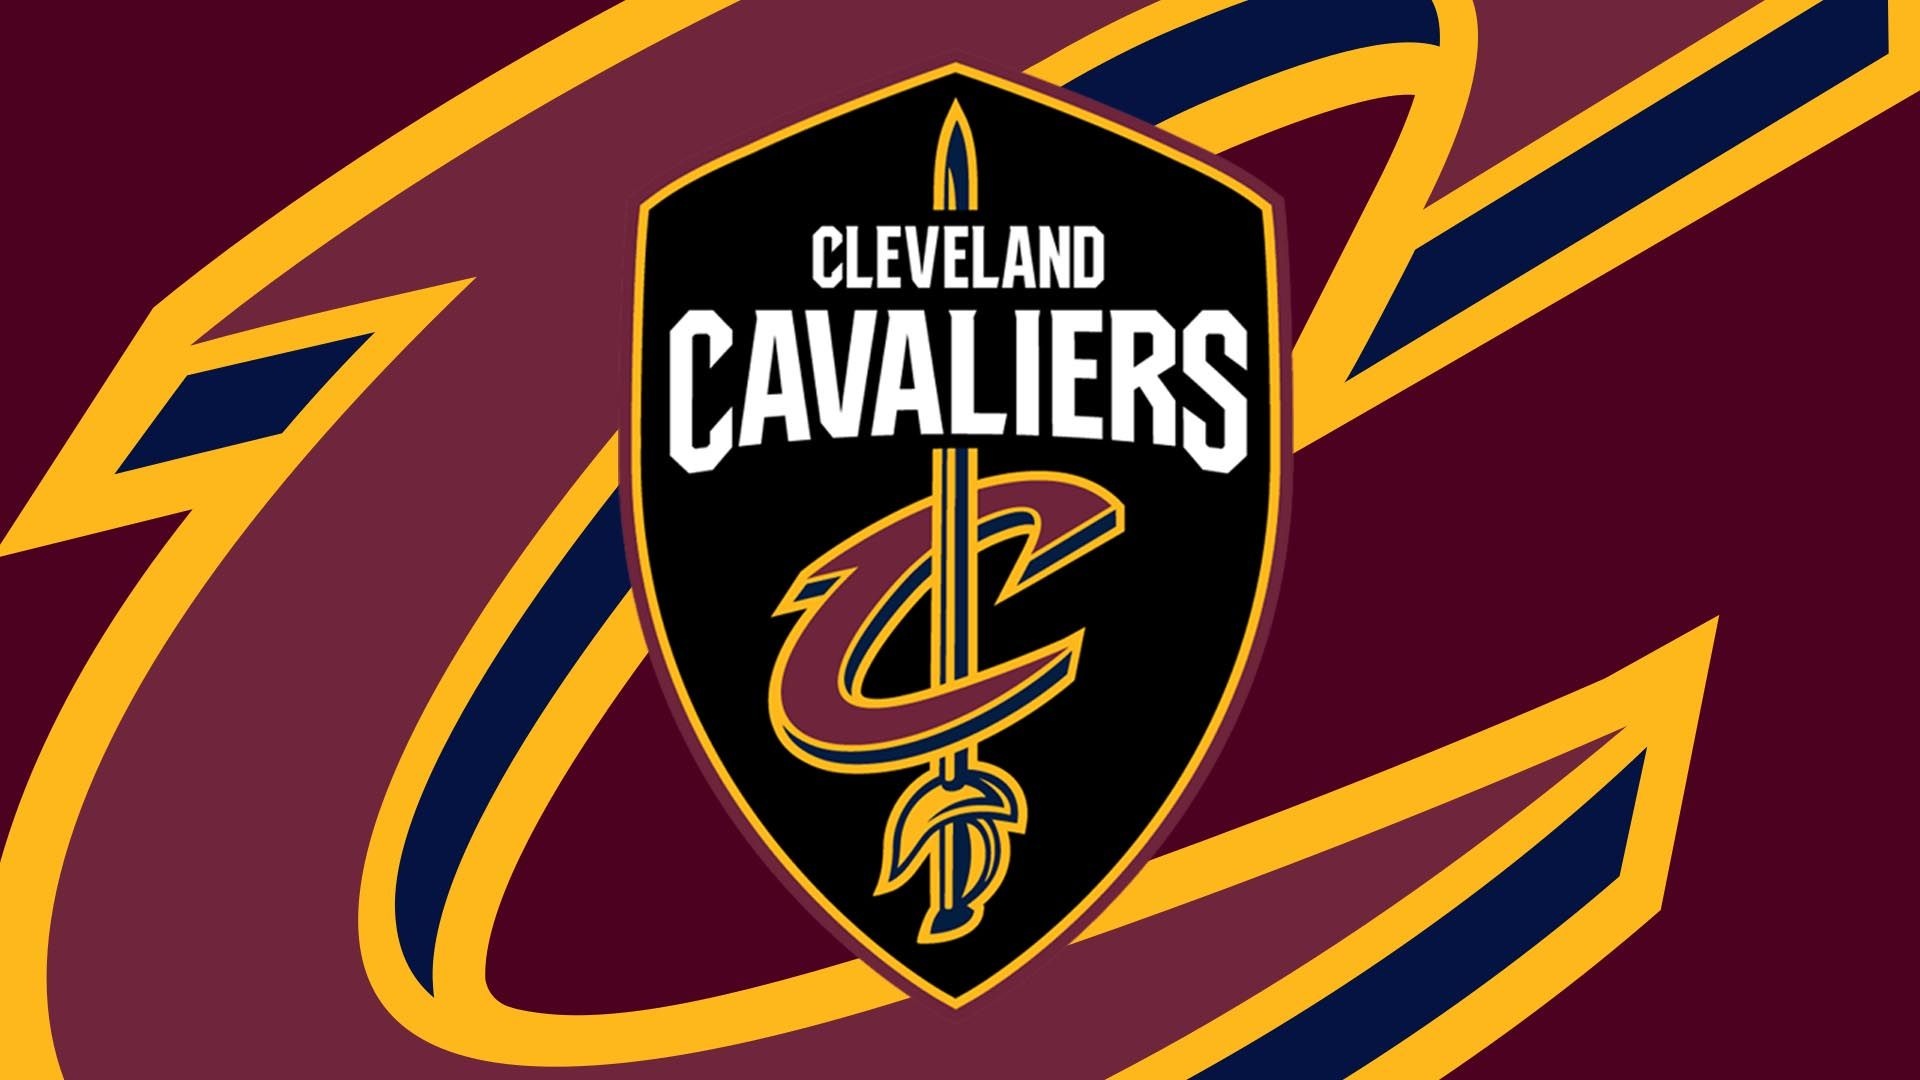 Cleveland Cavaliers: Defeated the Golden State Warriors in the 2016 NBA Finals. 1920x1080 Full HD Background.